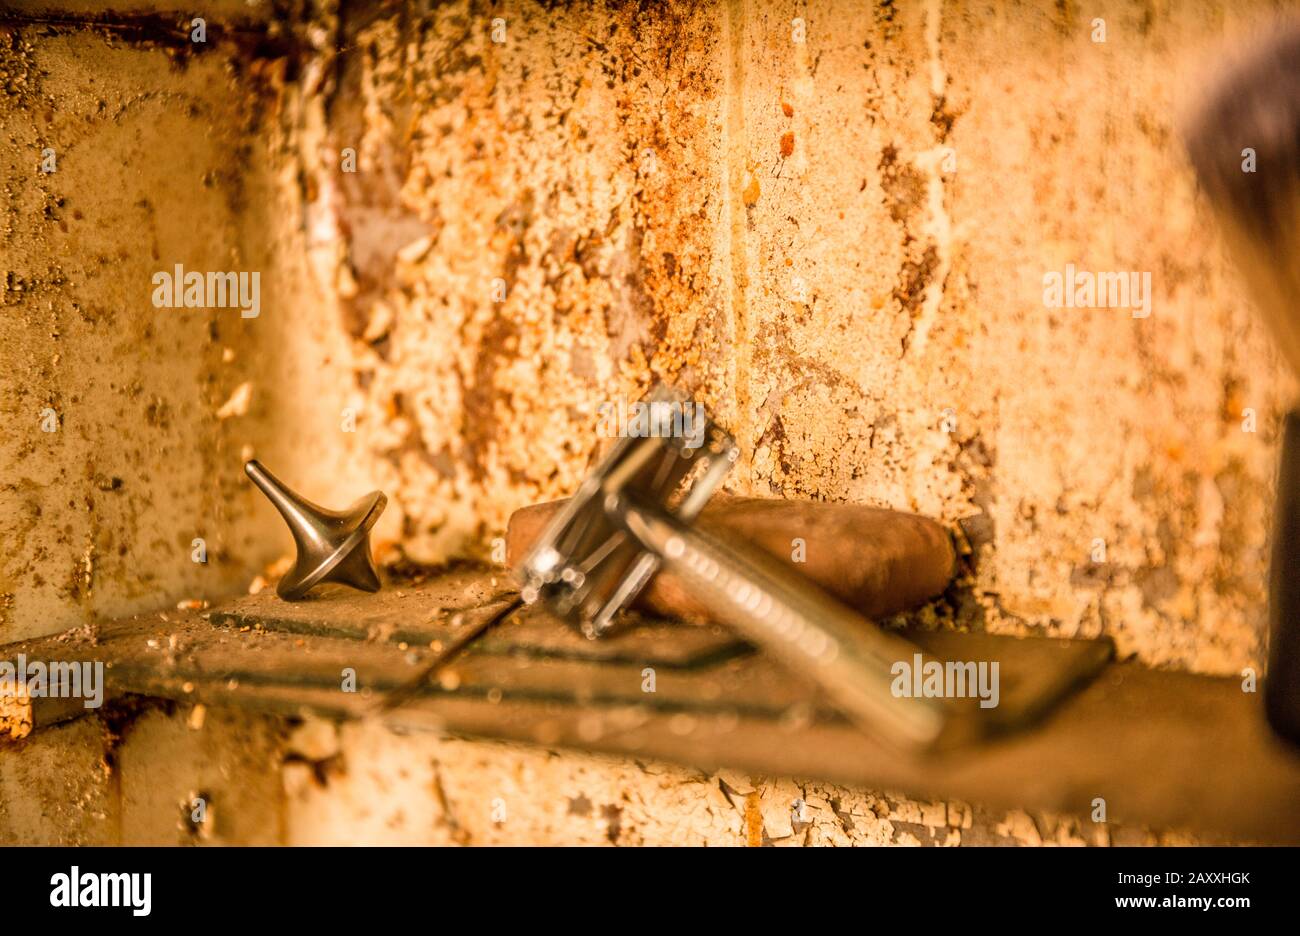 A spinning top with a vintage butterfly safety razor, in a rusty bathroom medicine cabinet. Stock Photo